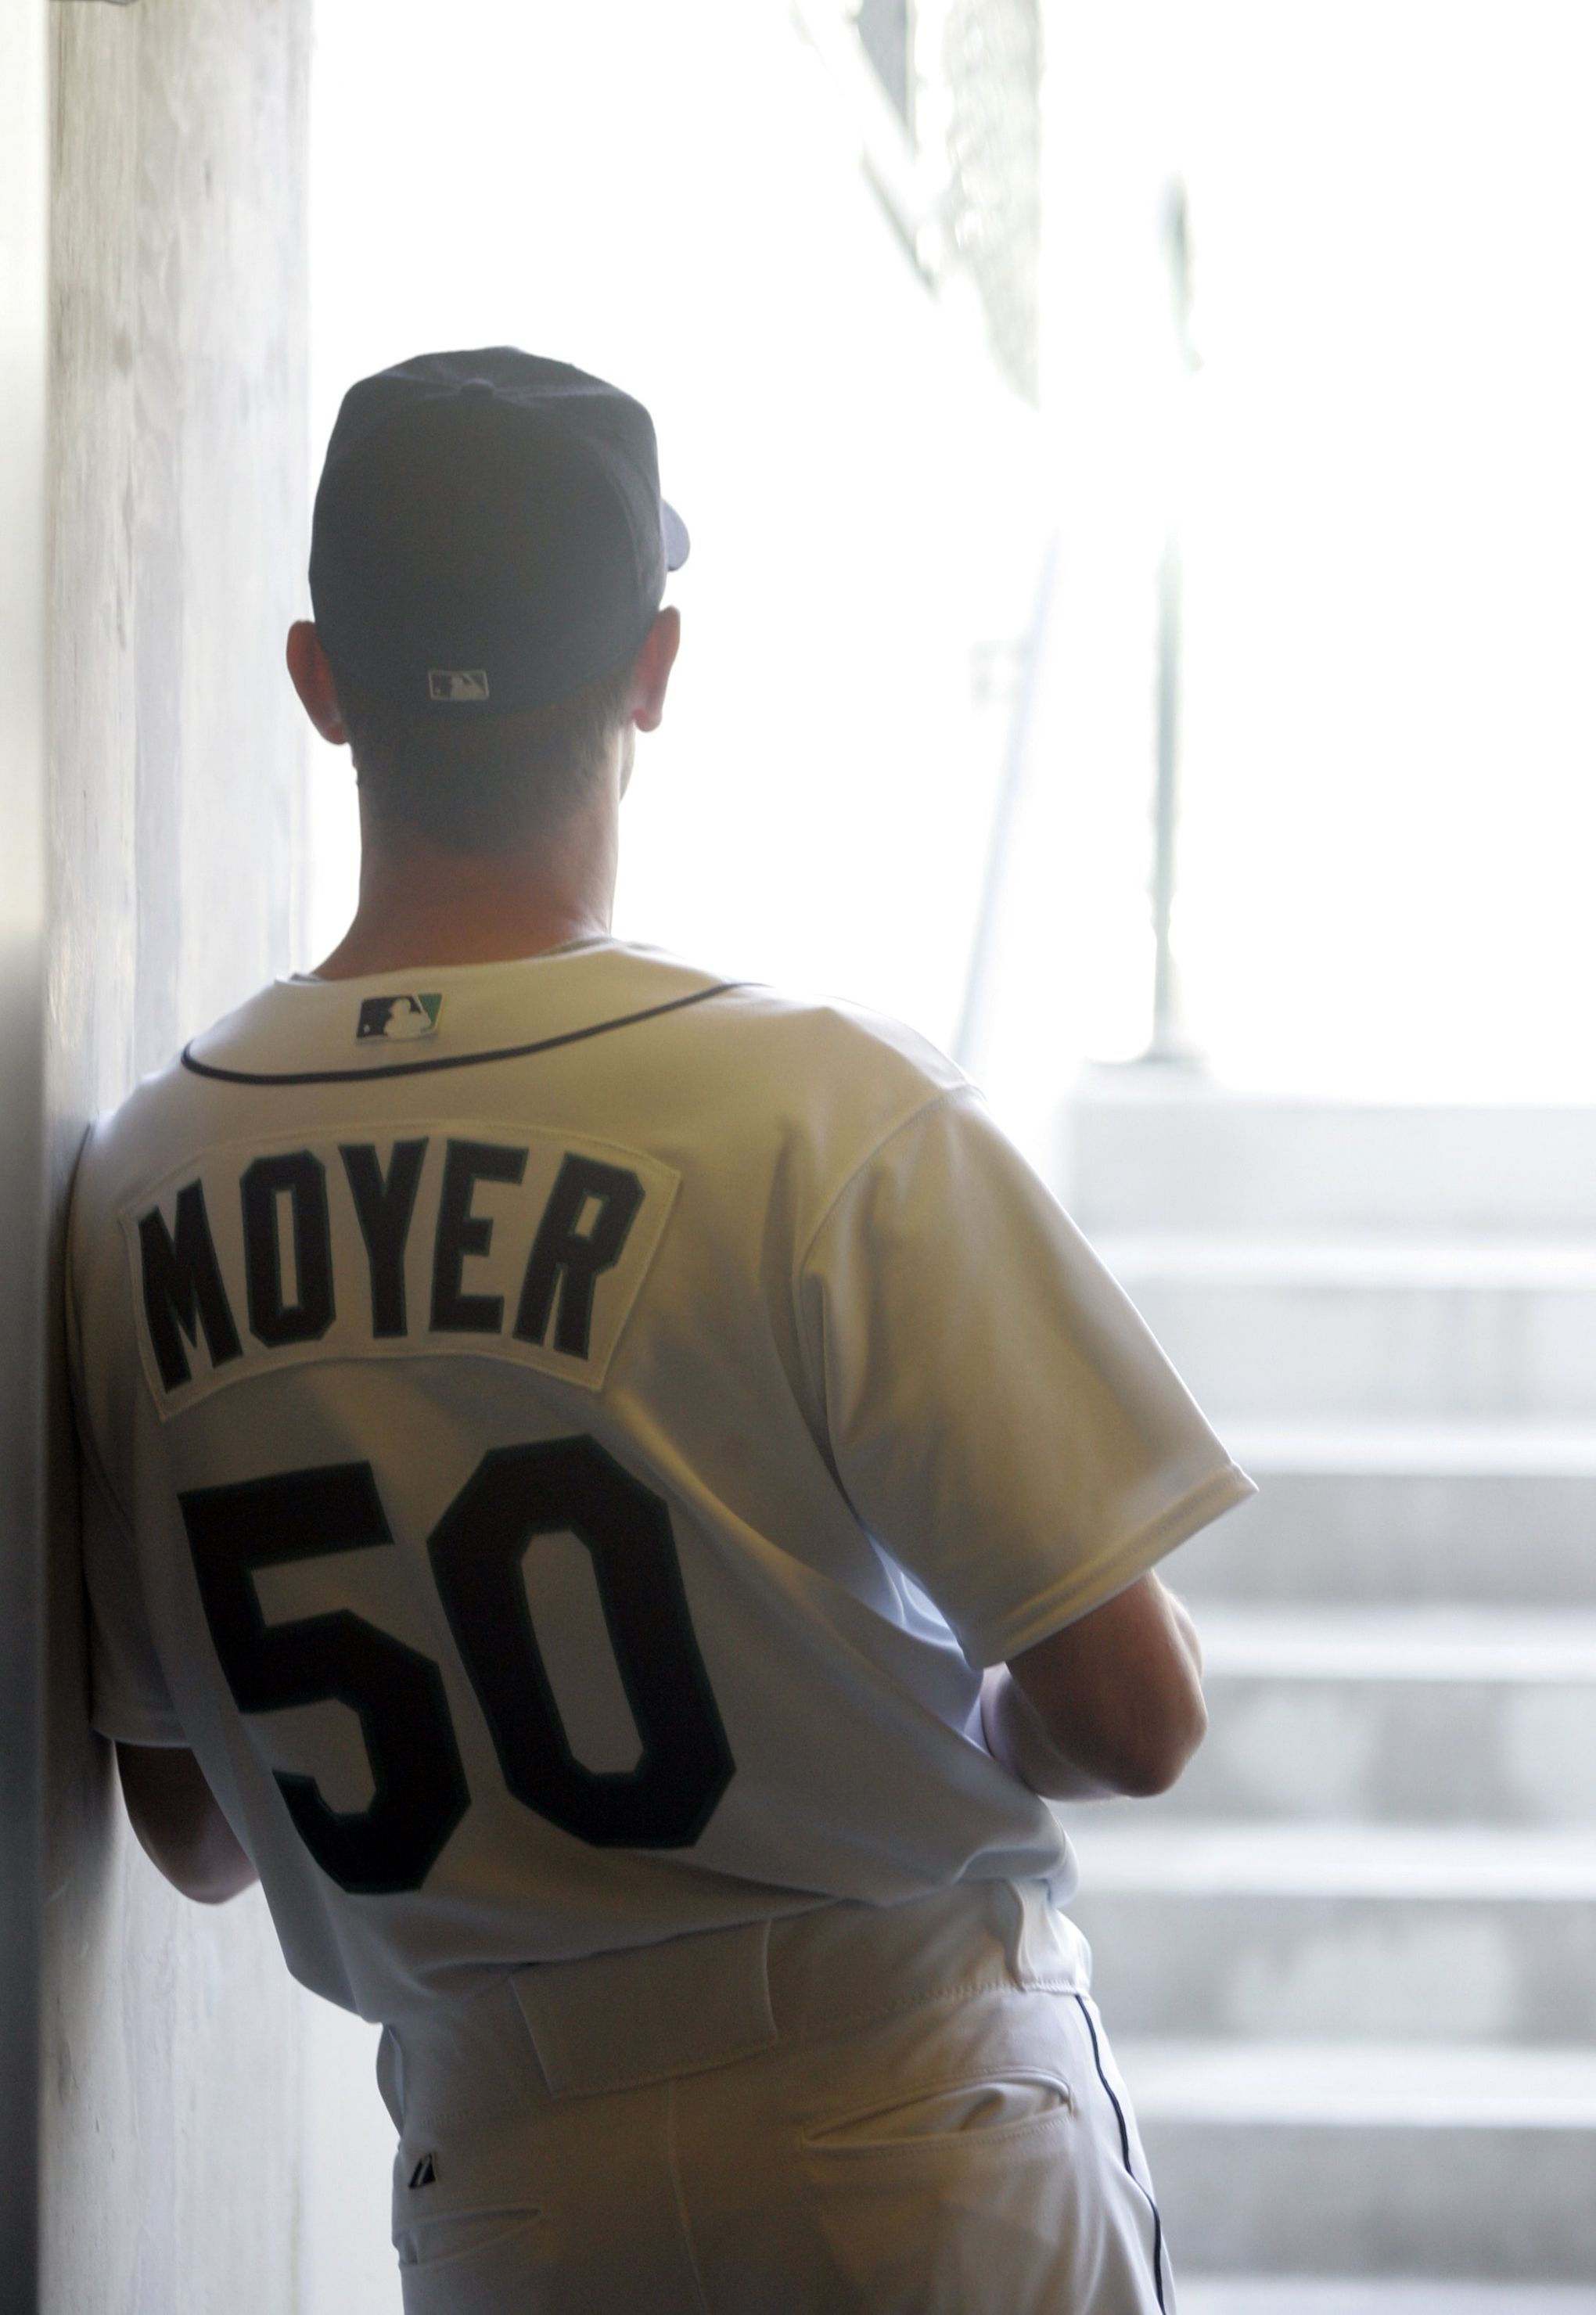 Take 2: Jamie Moyer's Mariners Hall of Fame ceremony brings back